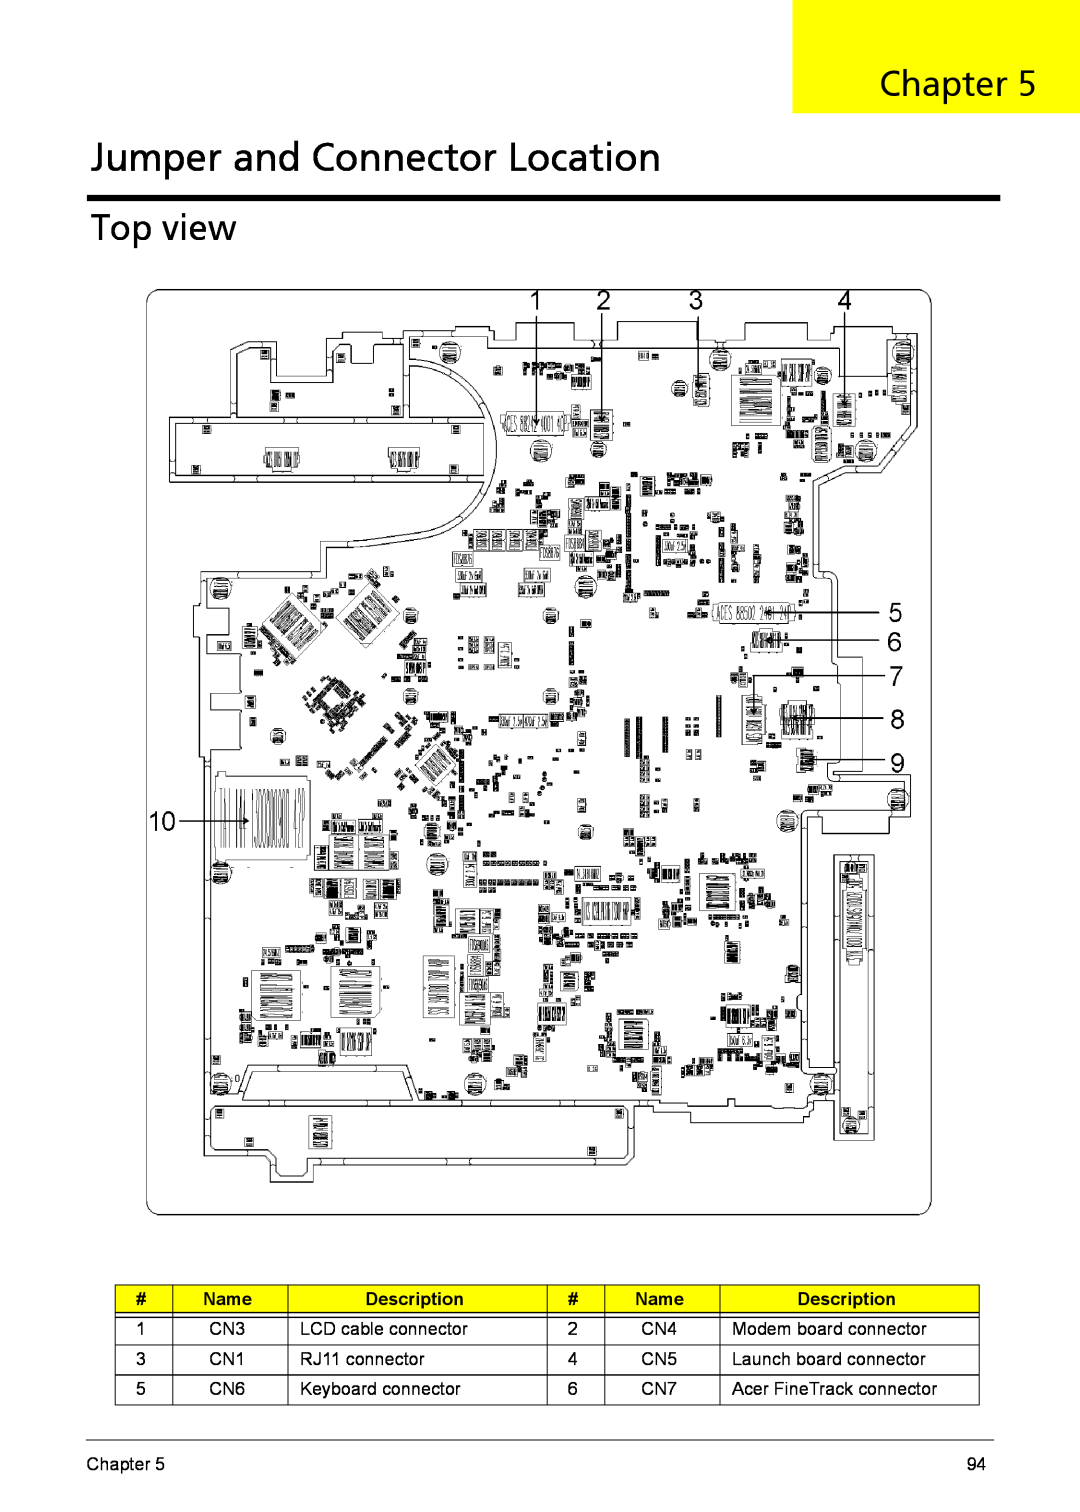 Acer 6410, 6460 manual Jumper and Connector Location, Chapter, Top view, Name, Description 